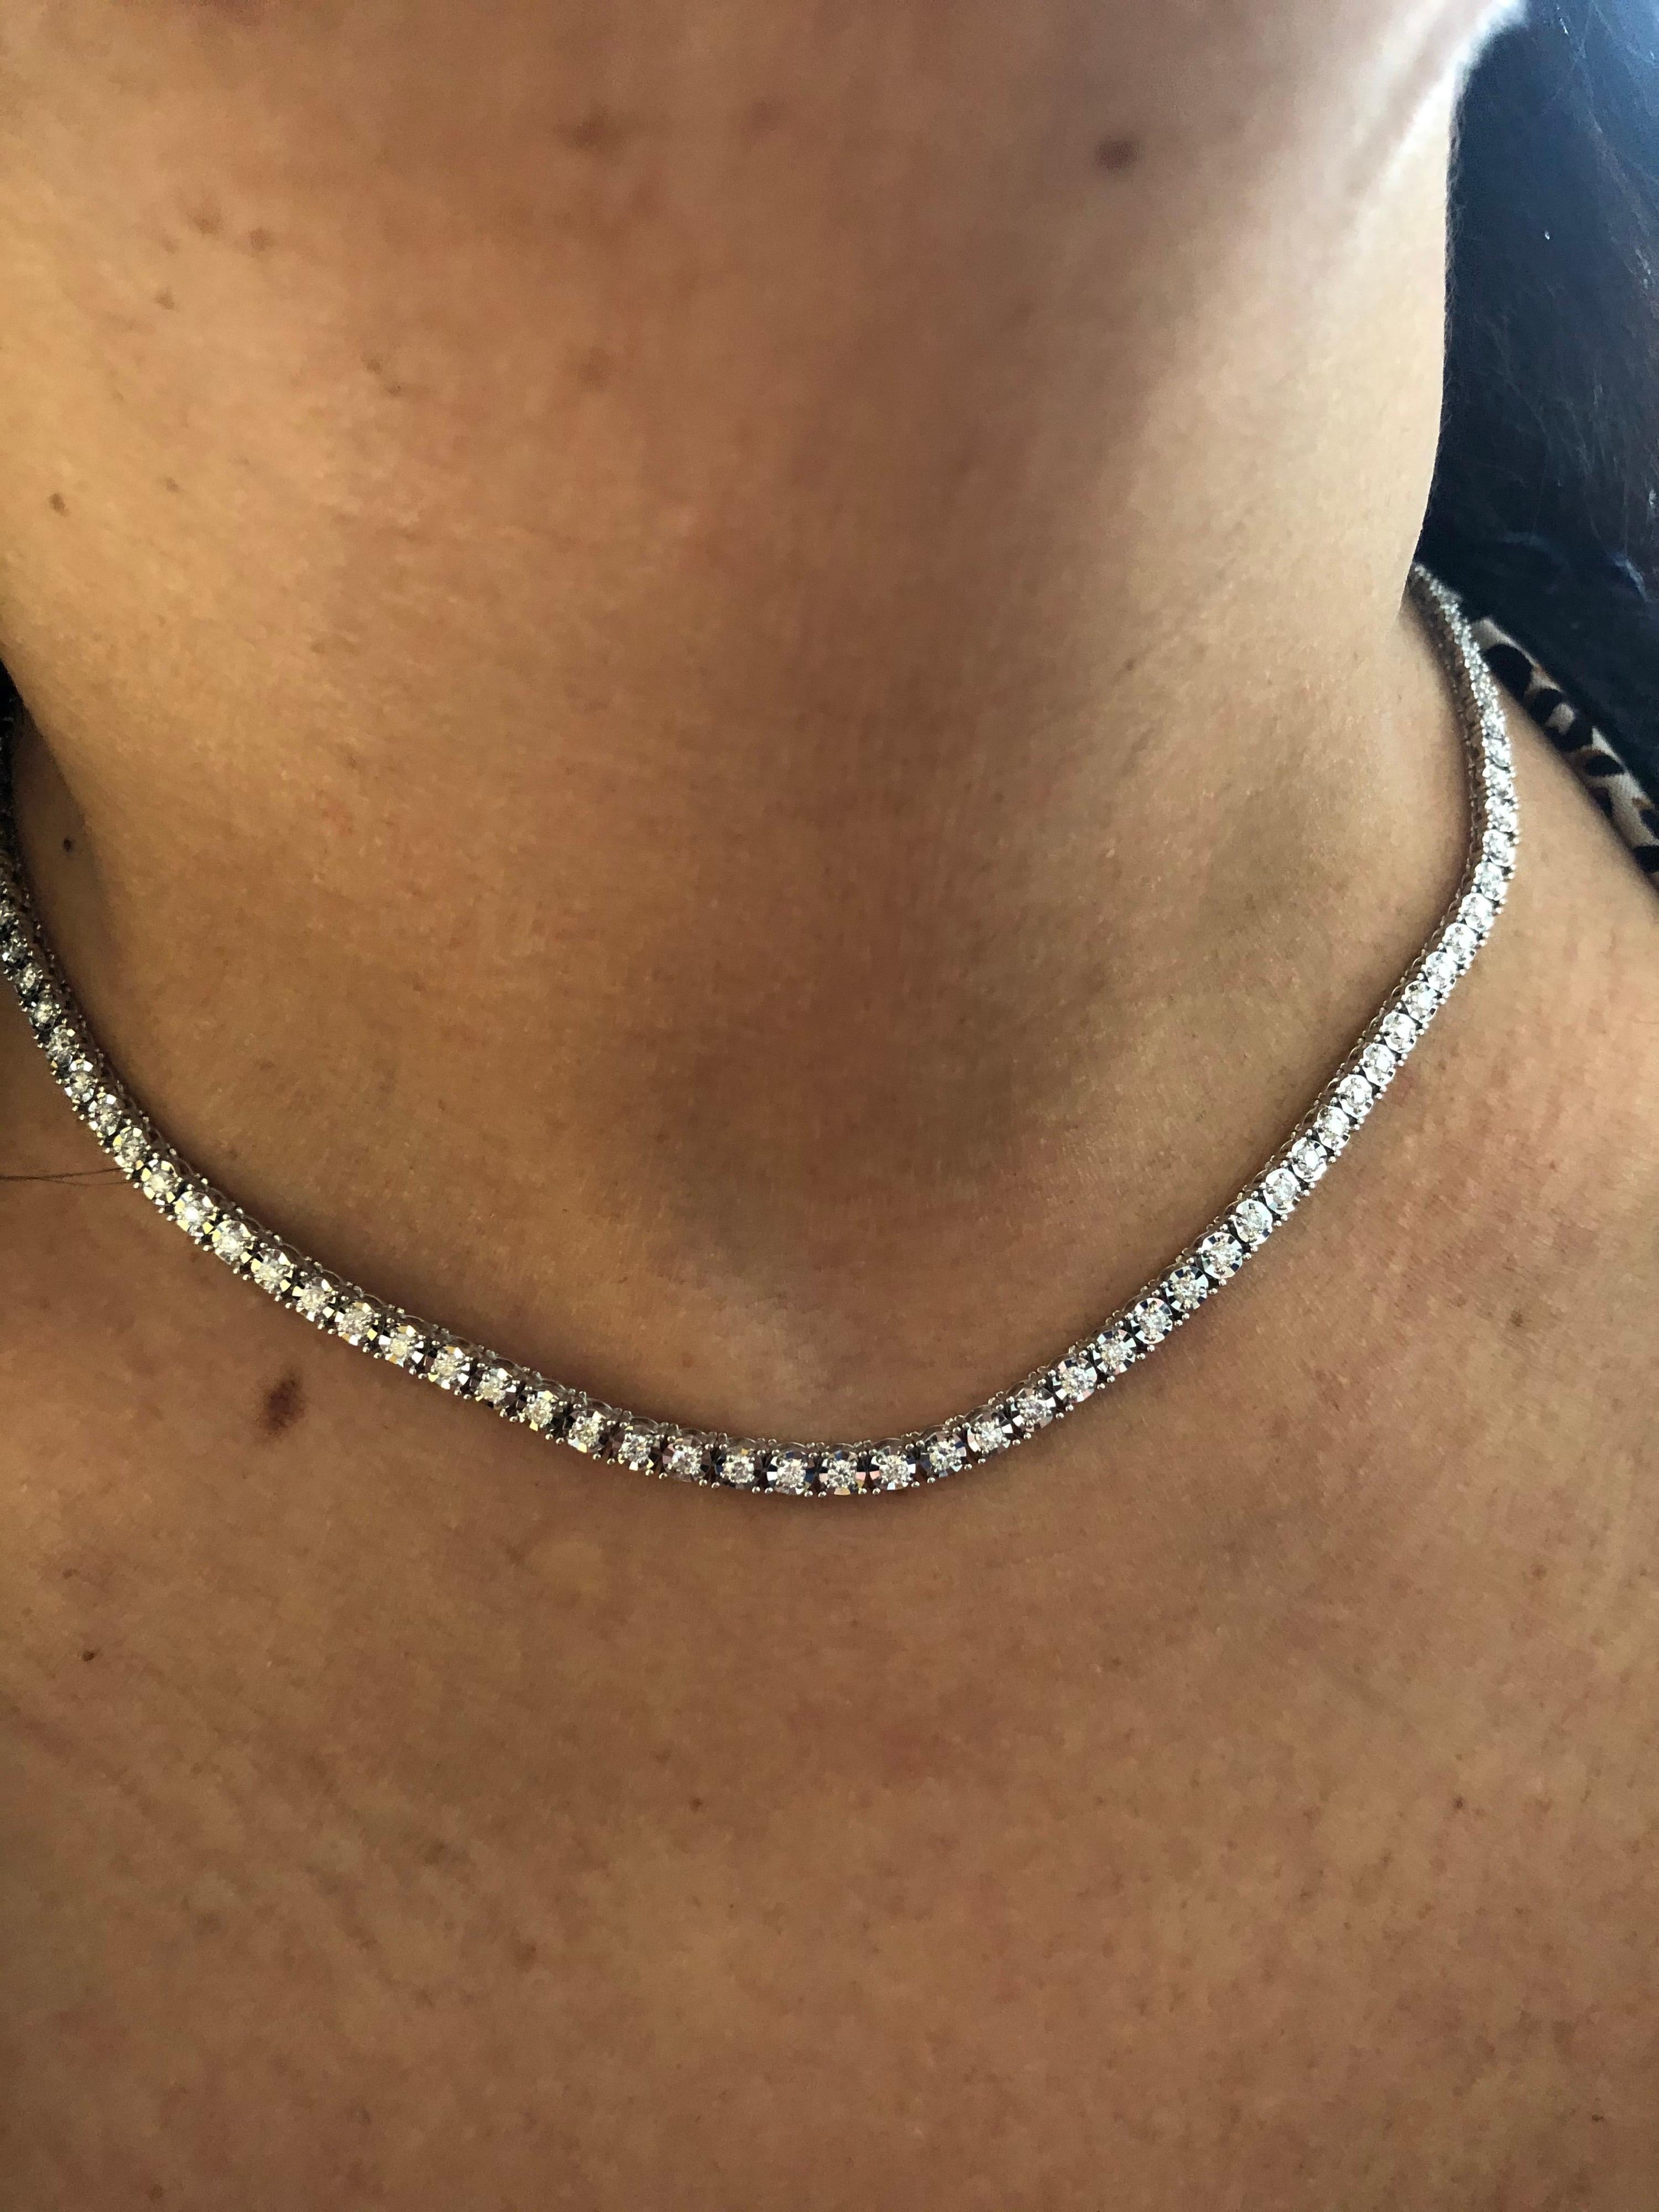 Tennis necklace set 3/4 of the way around in 14K white gold. The necklace is set in a mirror illusion setting. The necklace is 16 inch and is manufactured in Italy. The diamond weight is 2.20 carats. The color of the stones are G, the clarity is